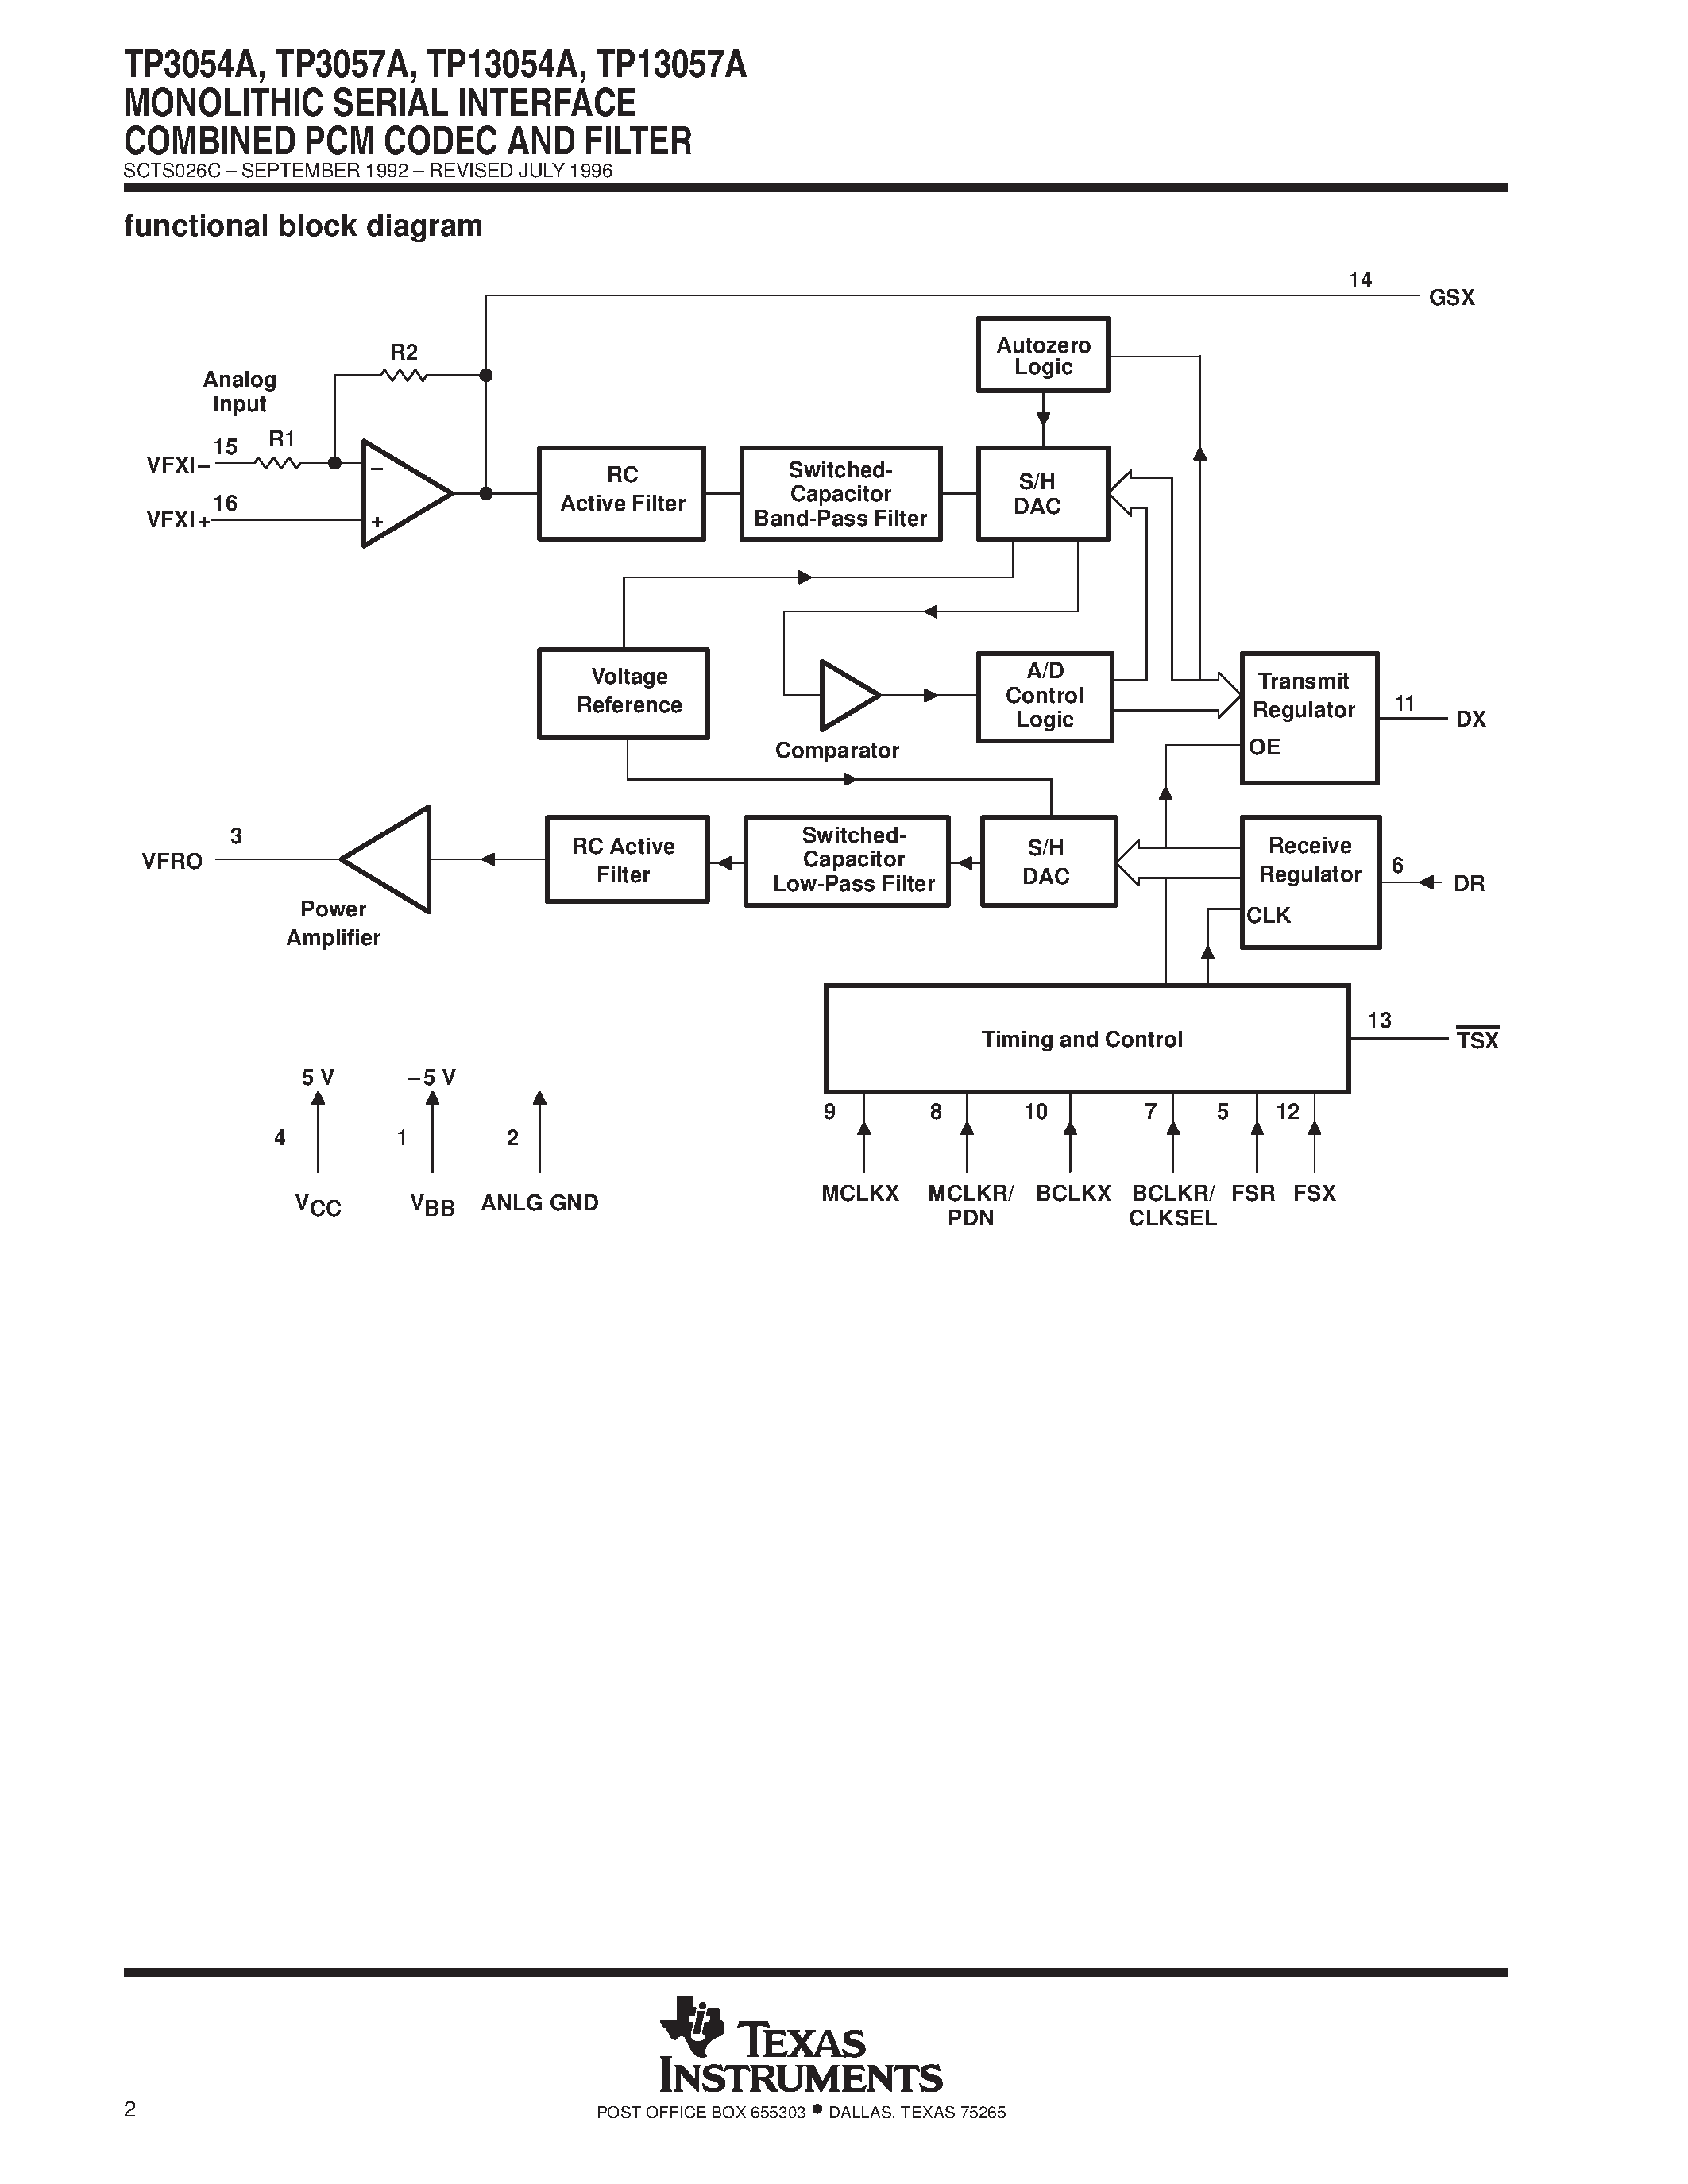 Datasheet TP13057A - MONOLITHIC SERIAL INTERFACE COMBINED PCM CODEC AND FILTER page 2